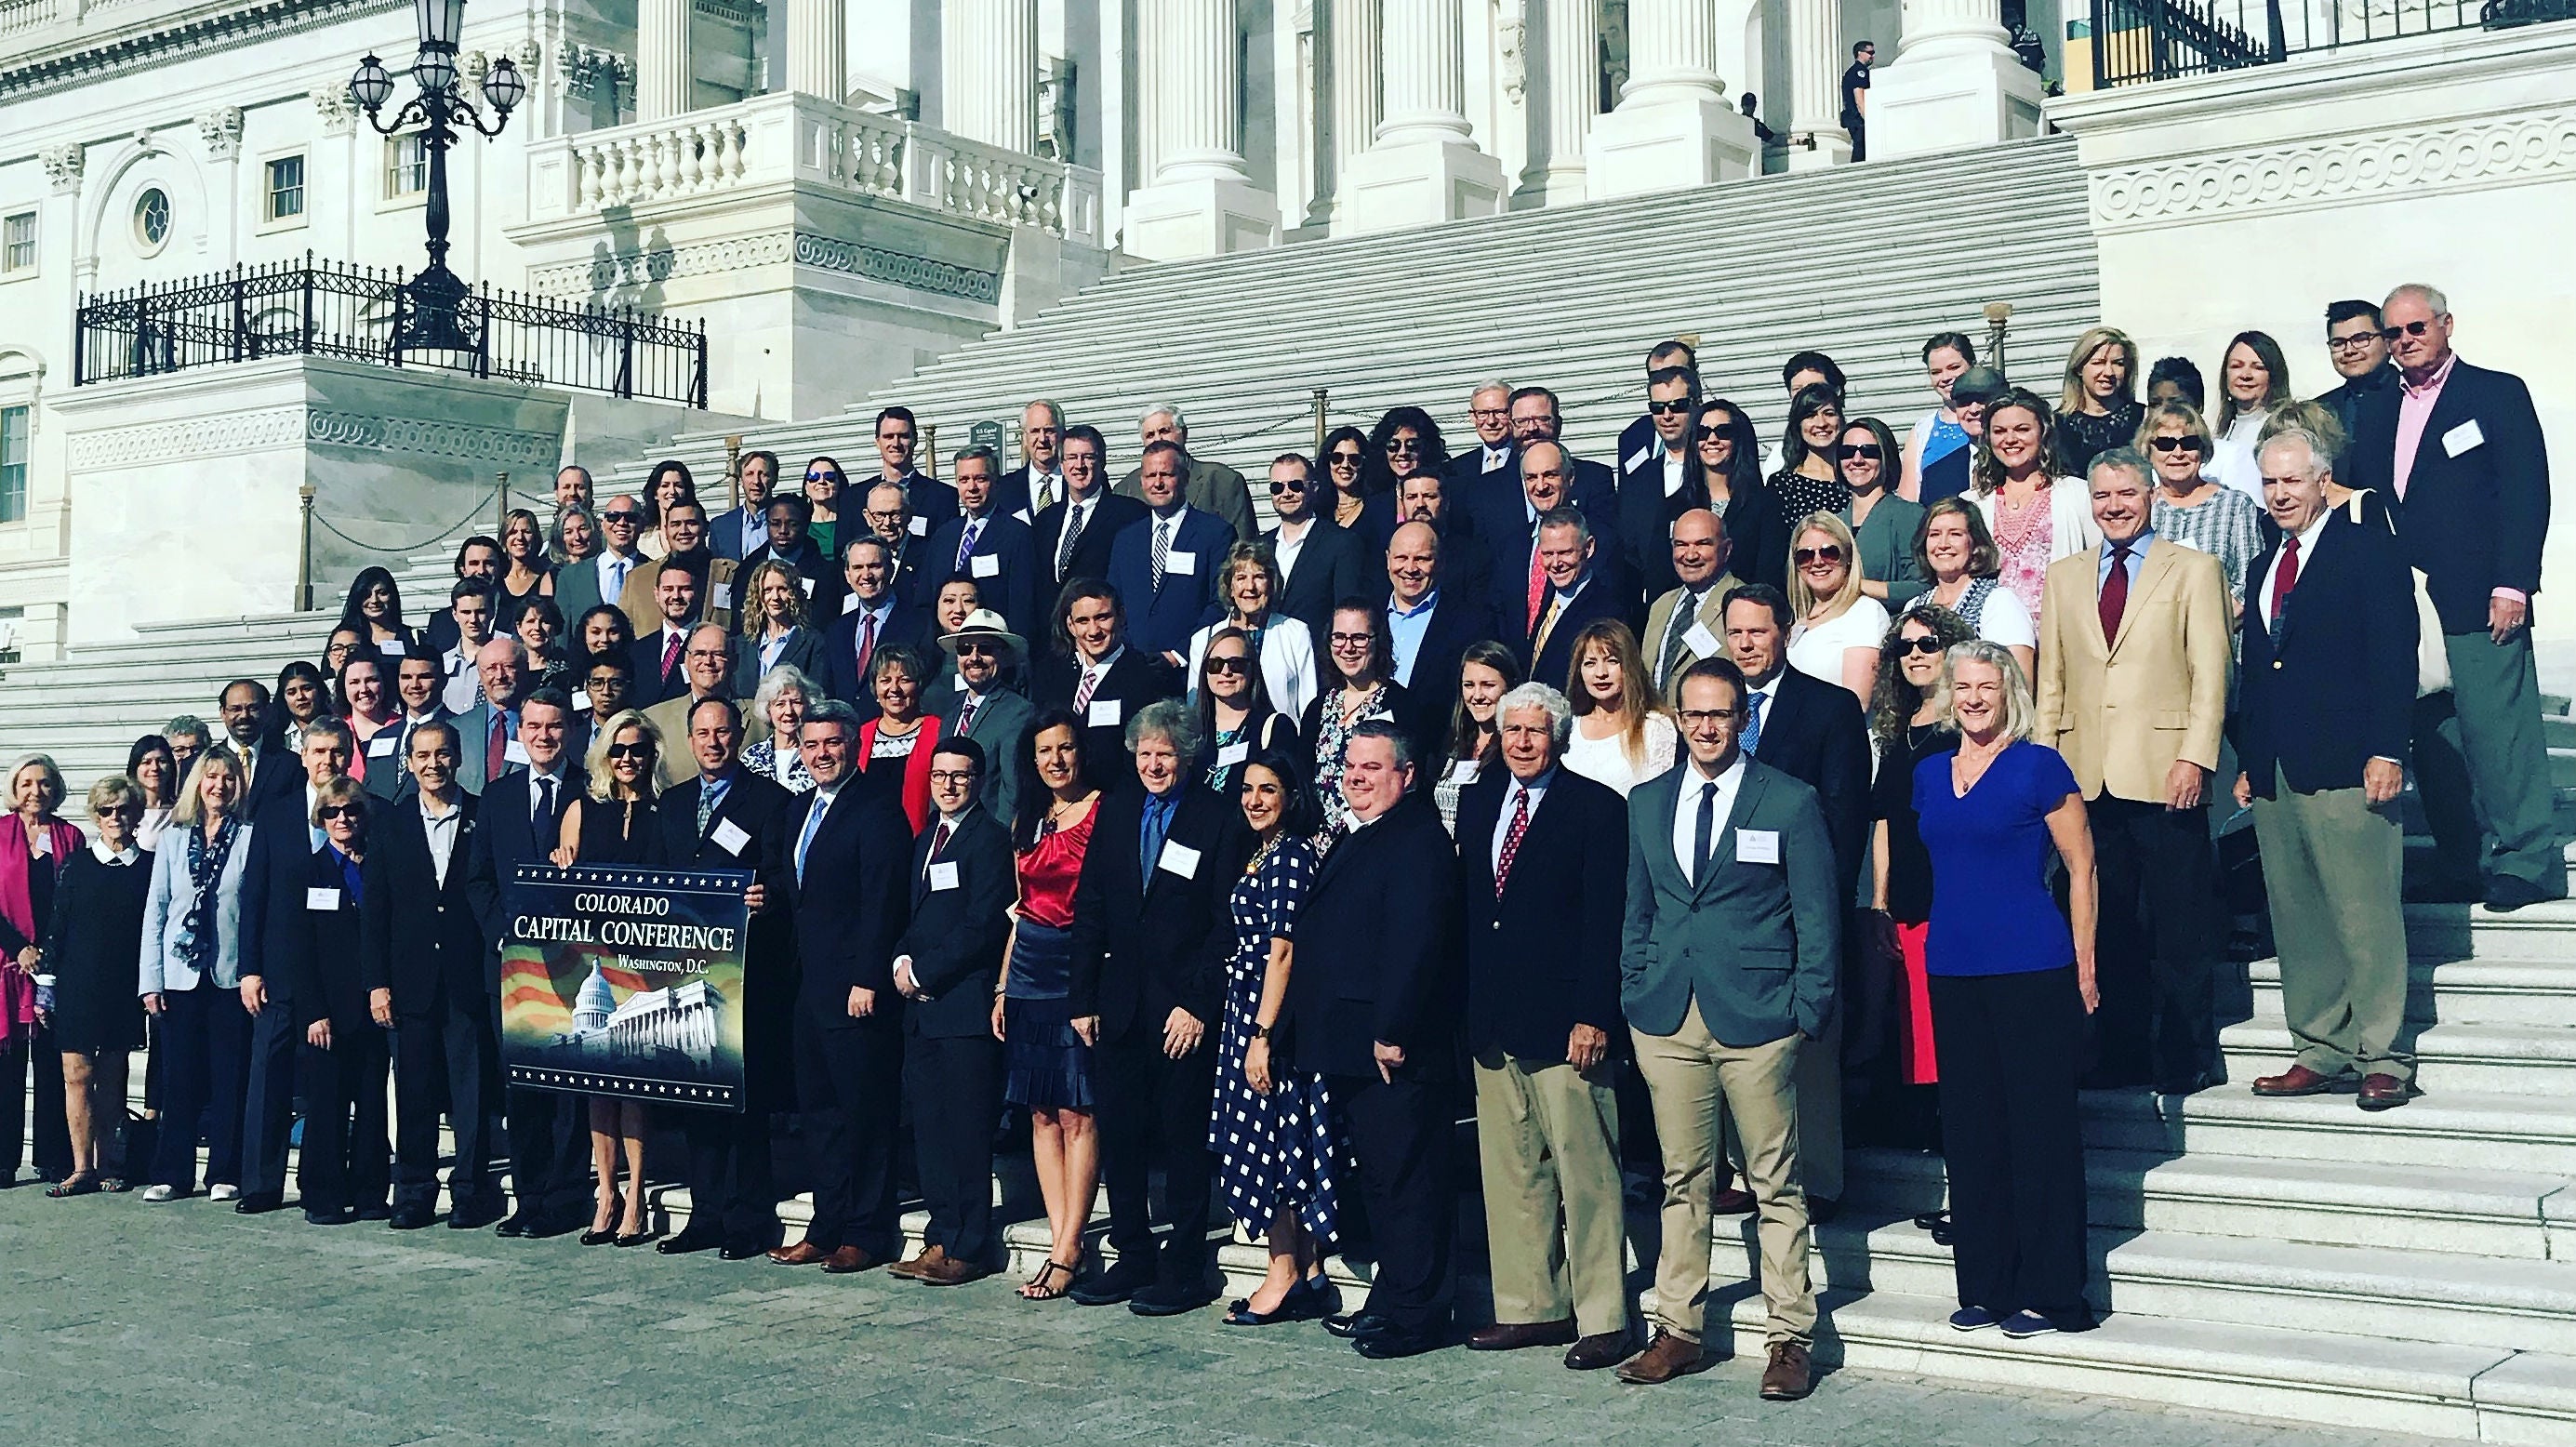 2018 Colorado Capital Conference Group Picture